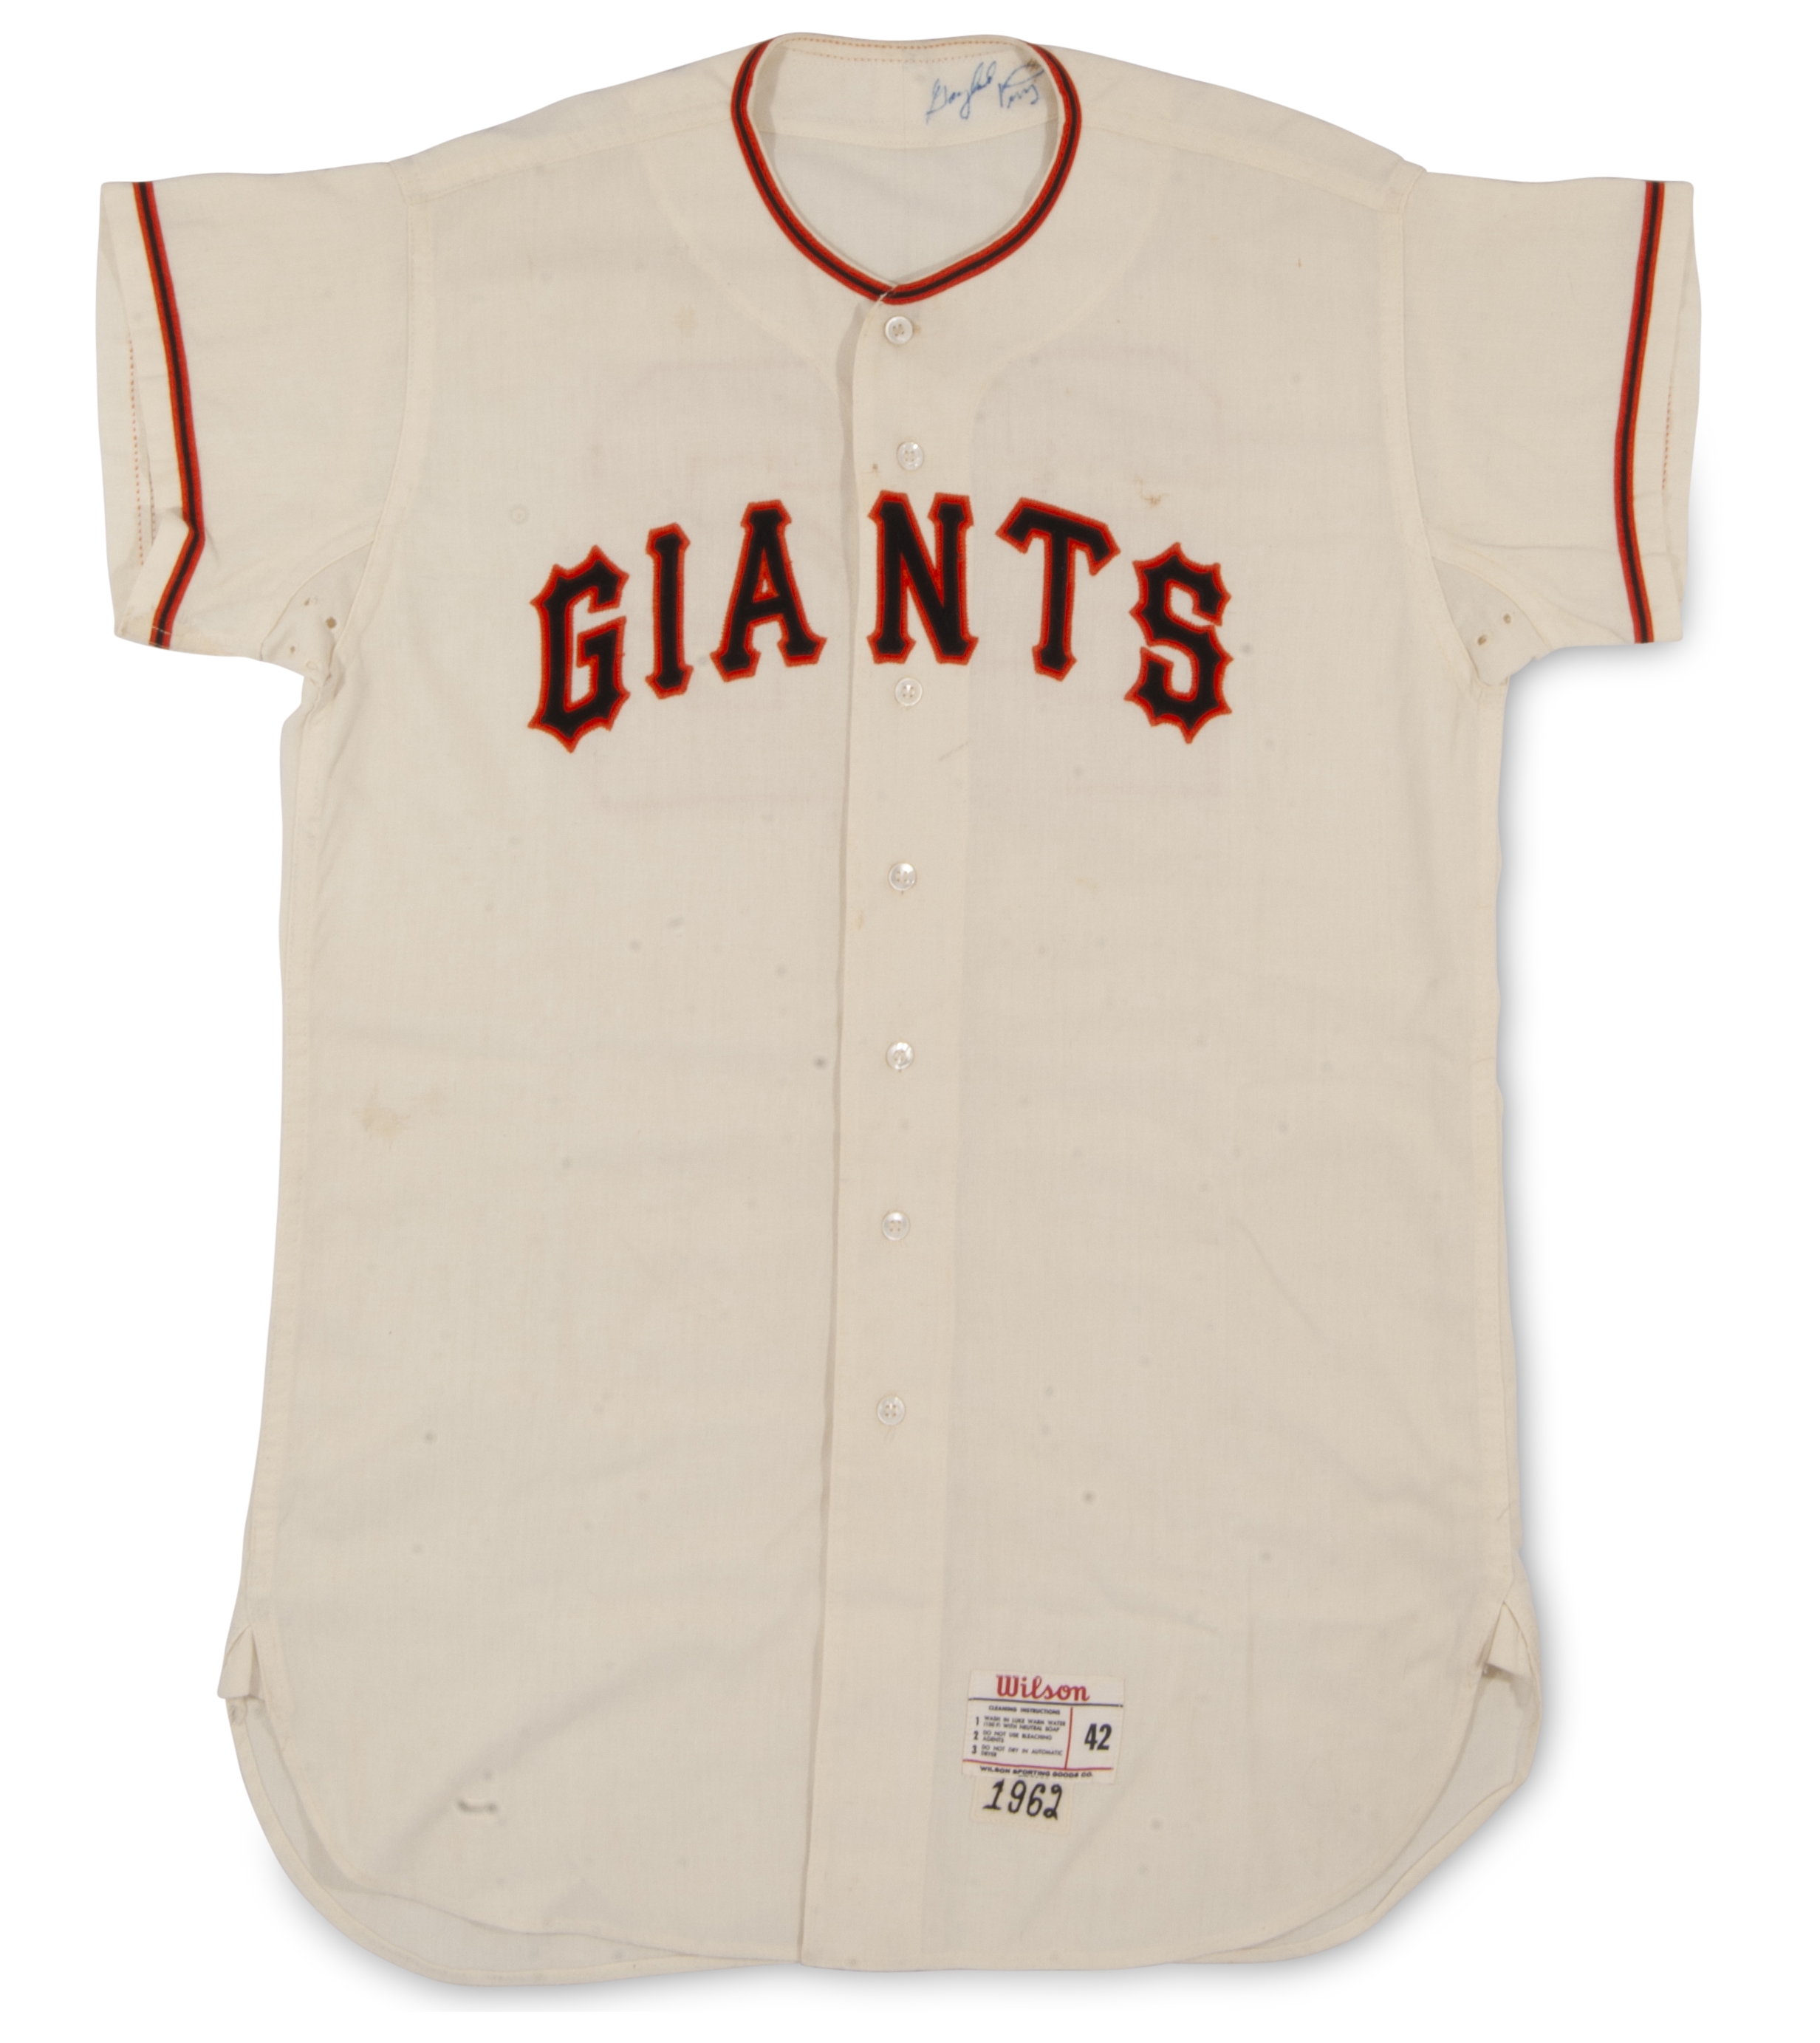 San Francisco Giants - Home Opening Day Jersey - Game Used